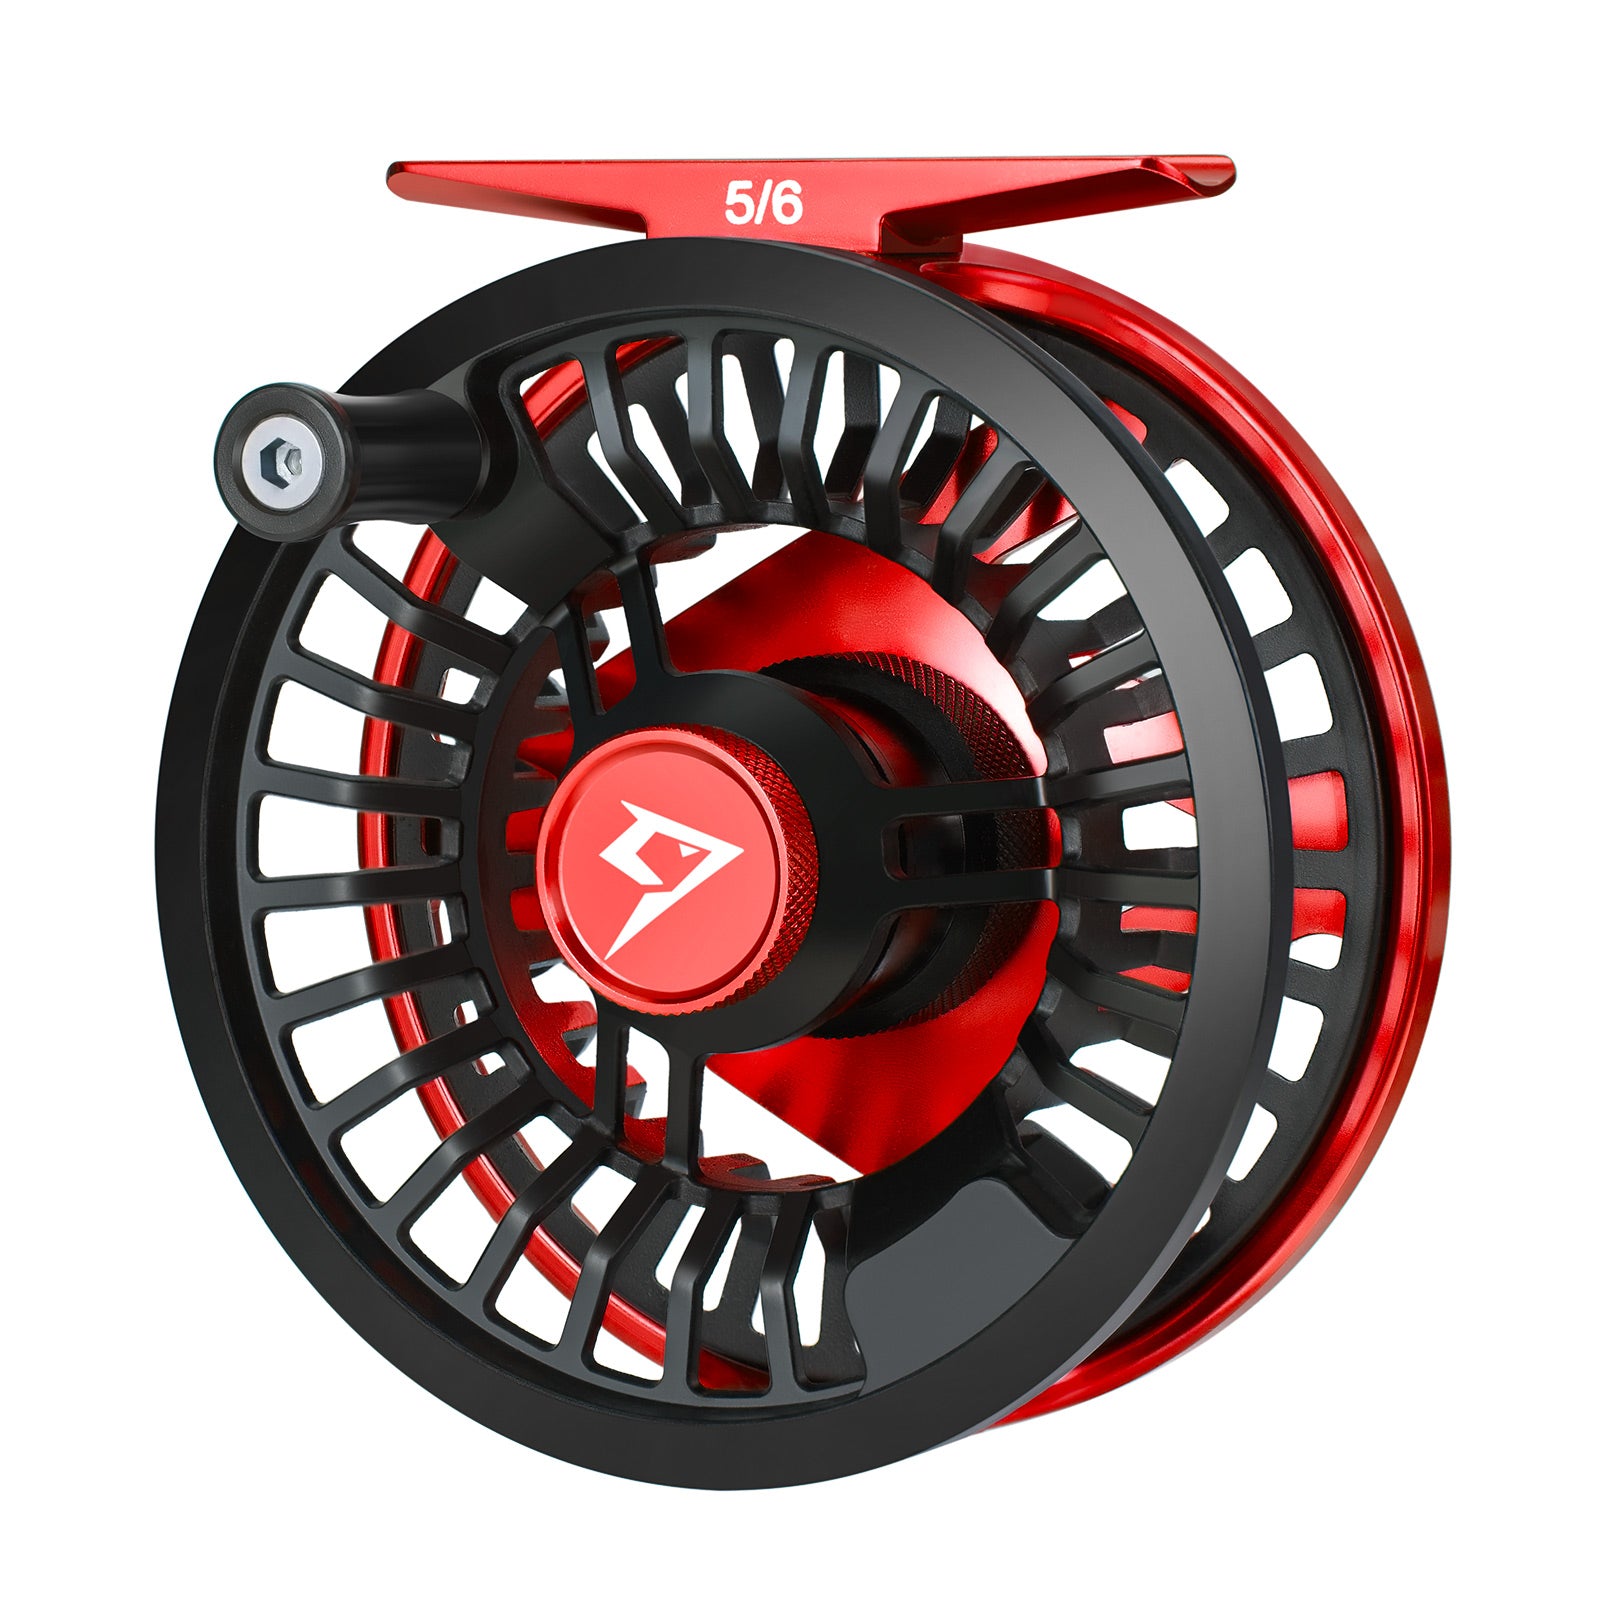 Piscifun® Aoka XS Fly Fishing Reel with Sealed Drag, CNC